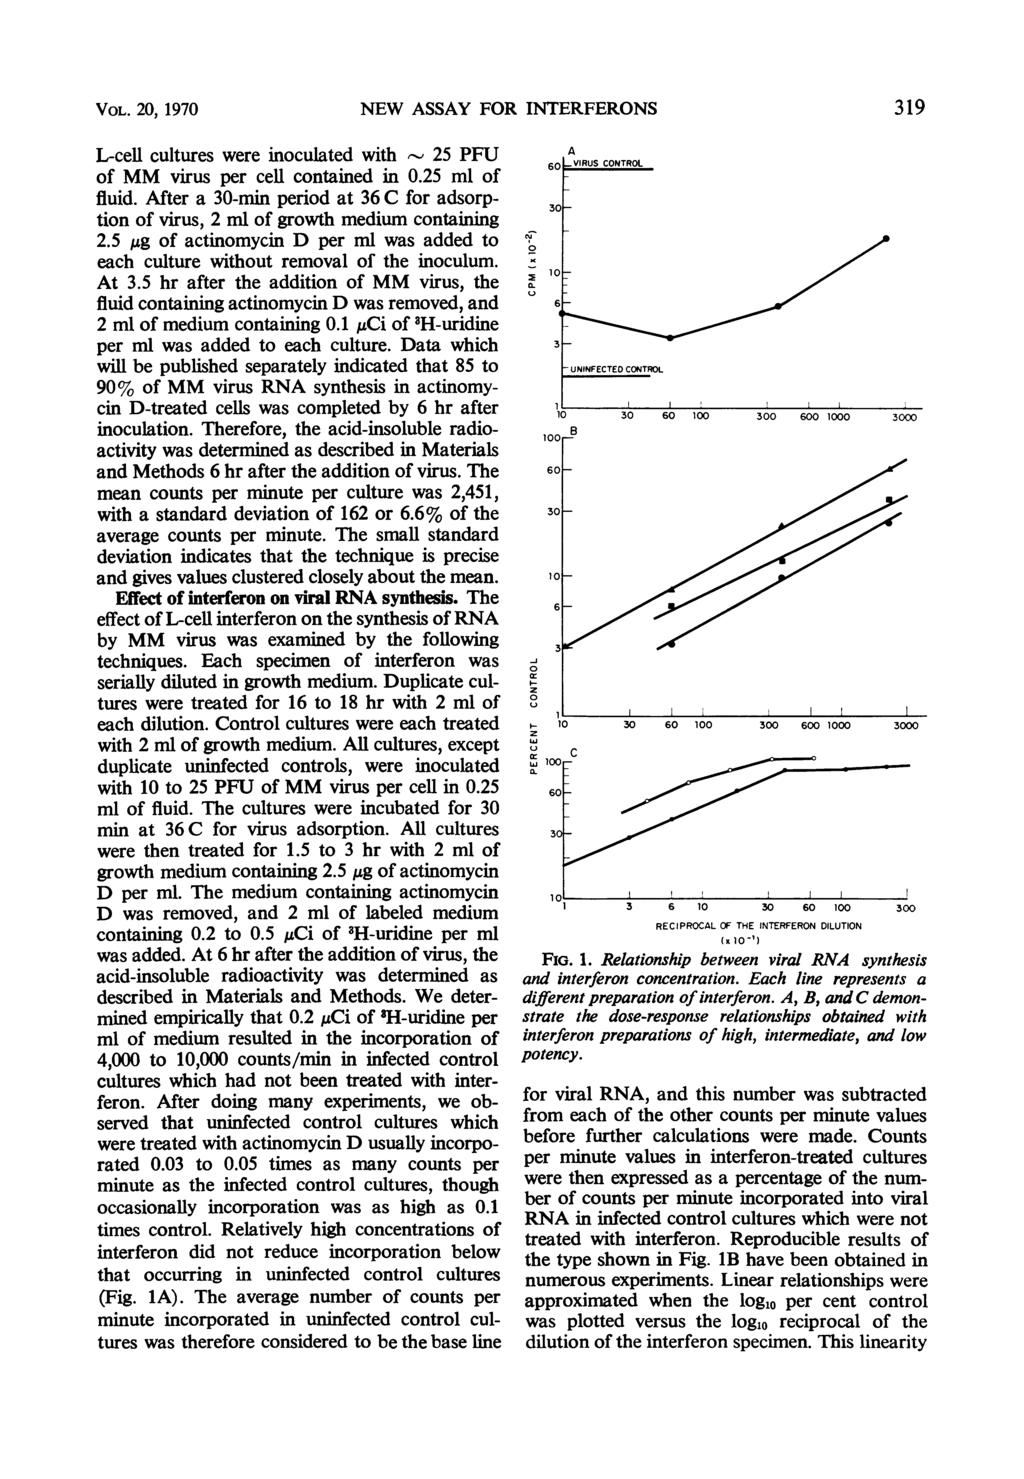 VOL. 20, 1970 NEW ASSAY FOR INTERFERONS L-cell cultures were inoculated with 25 PFU of MM virus per cell contained in 0.25 ml of fluid.